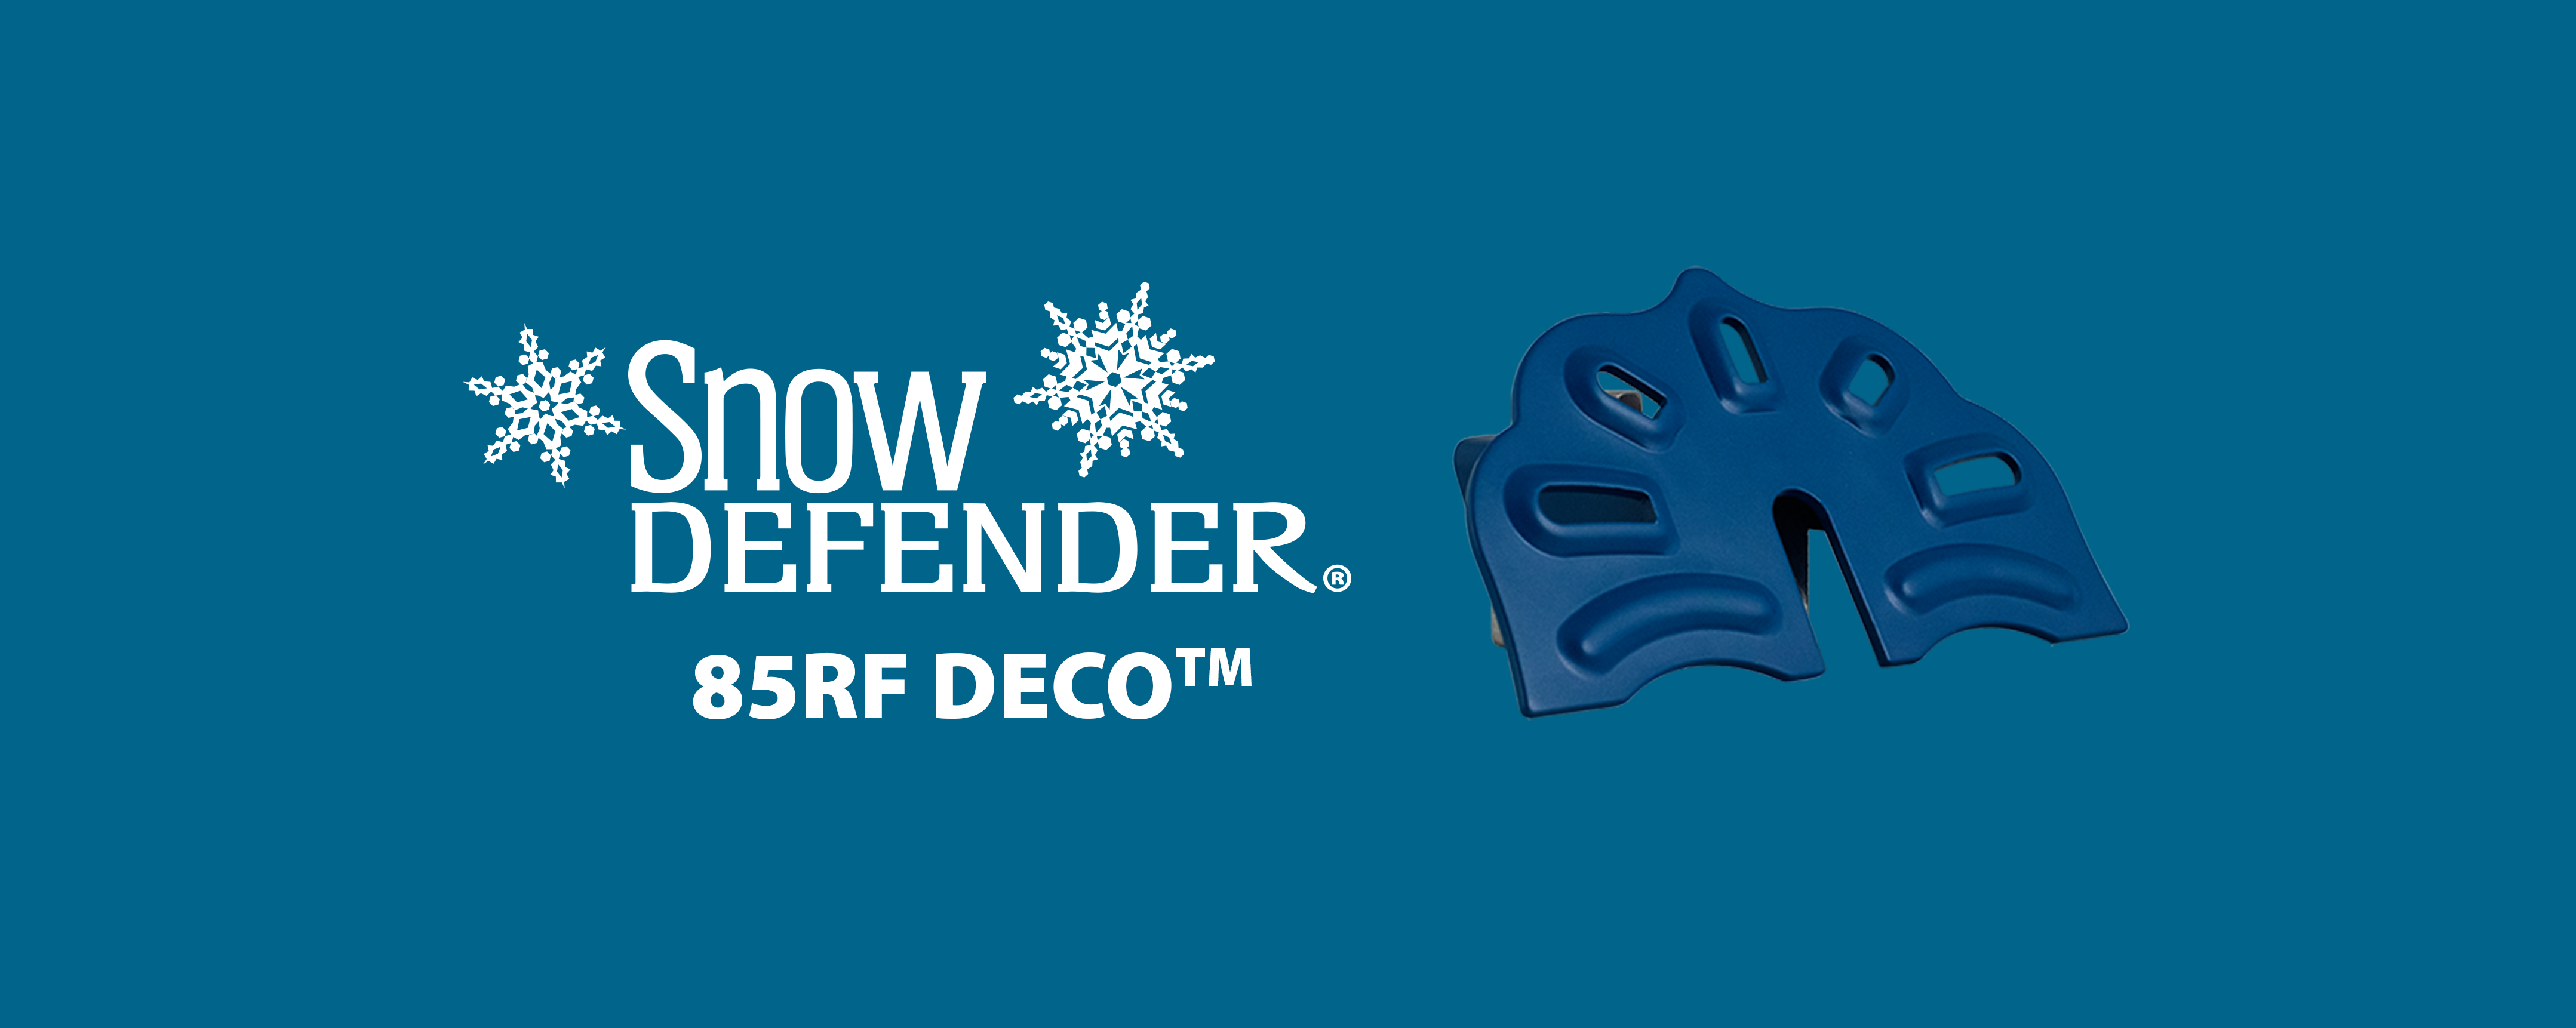 Snow-defender-landing-page-banner-merged-colors